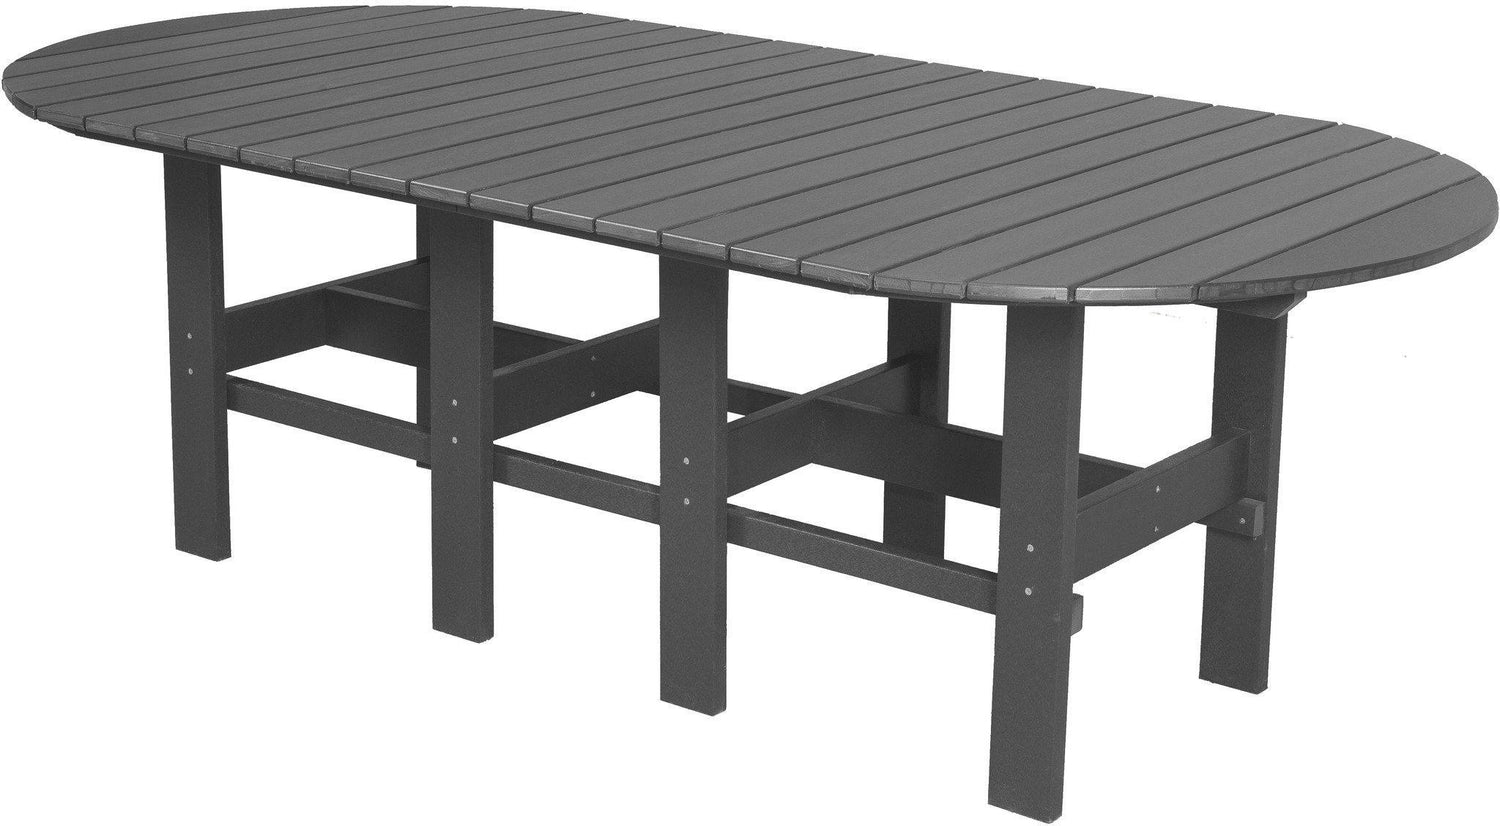 Wildridge Classic Recycled Plastic Dining table collection